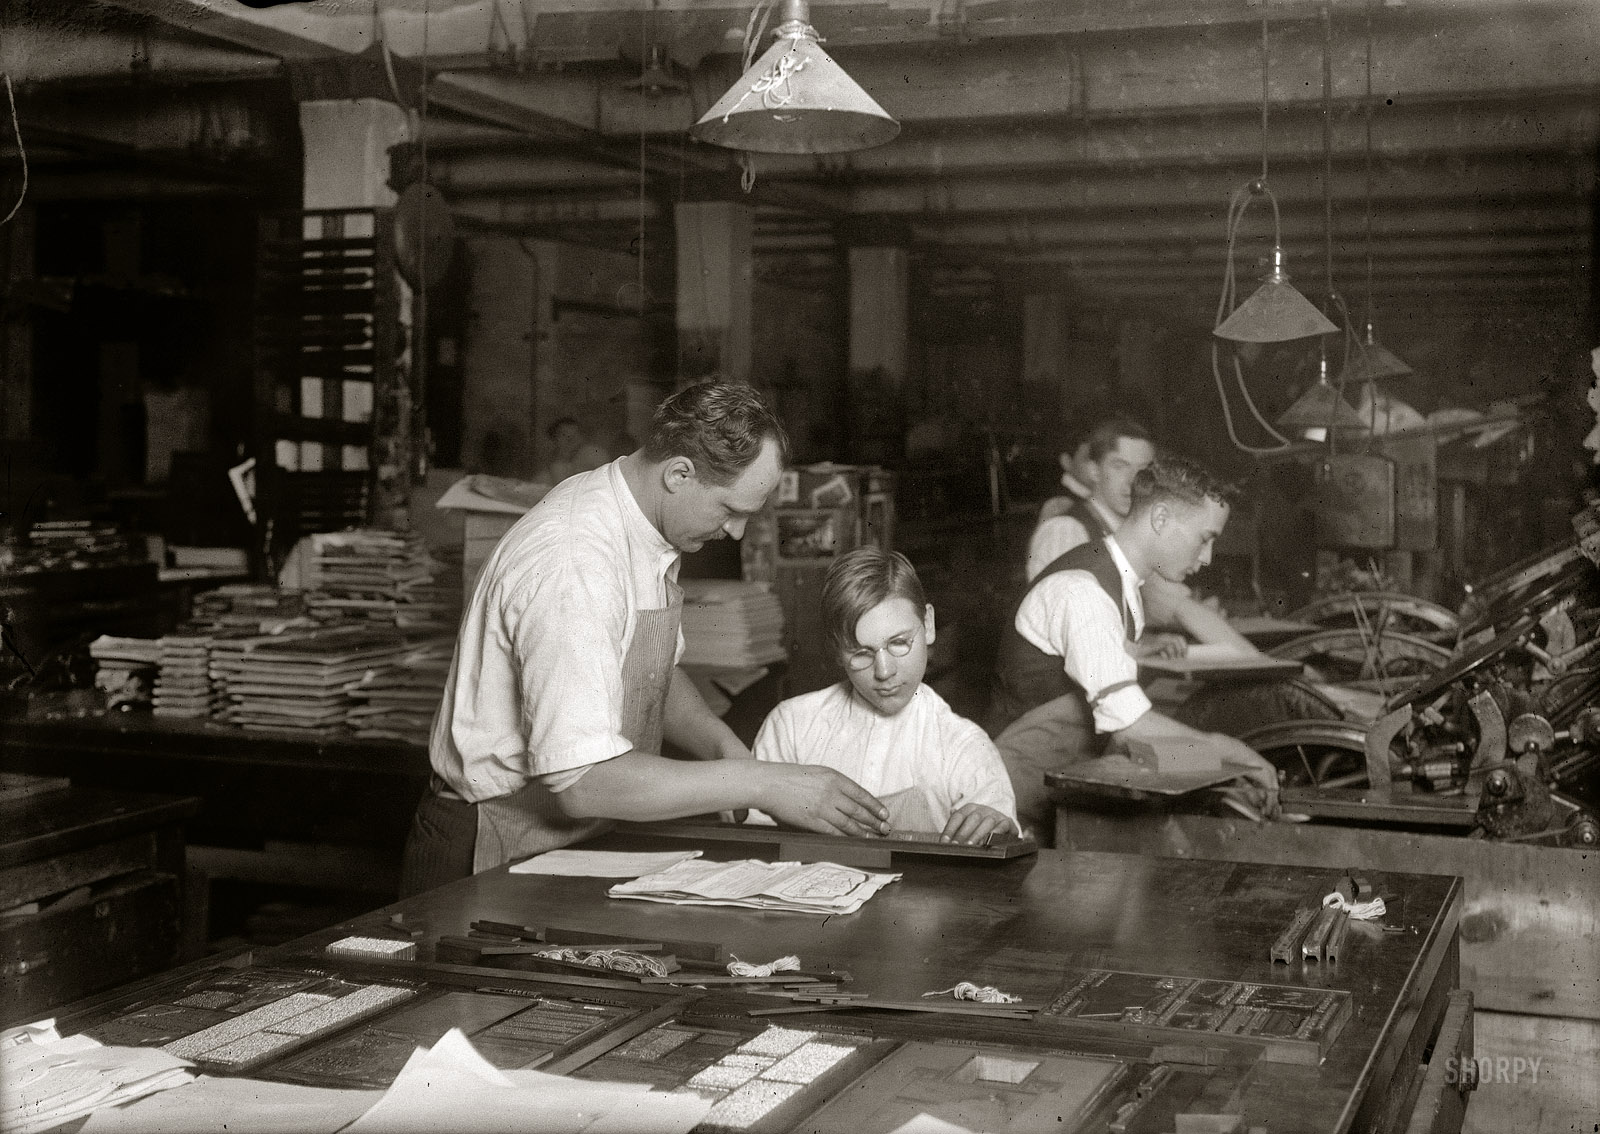 New York, February 1917. "Horace Lindfors, 14-year-old printer's helper, sizing up leads for the Riverside Press, First Avenue." 5x7 inch glass negative. Photograph and caption by Lewis Wickes Hine. View full size.